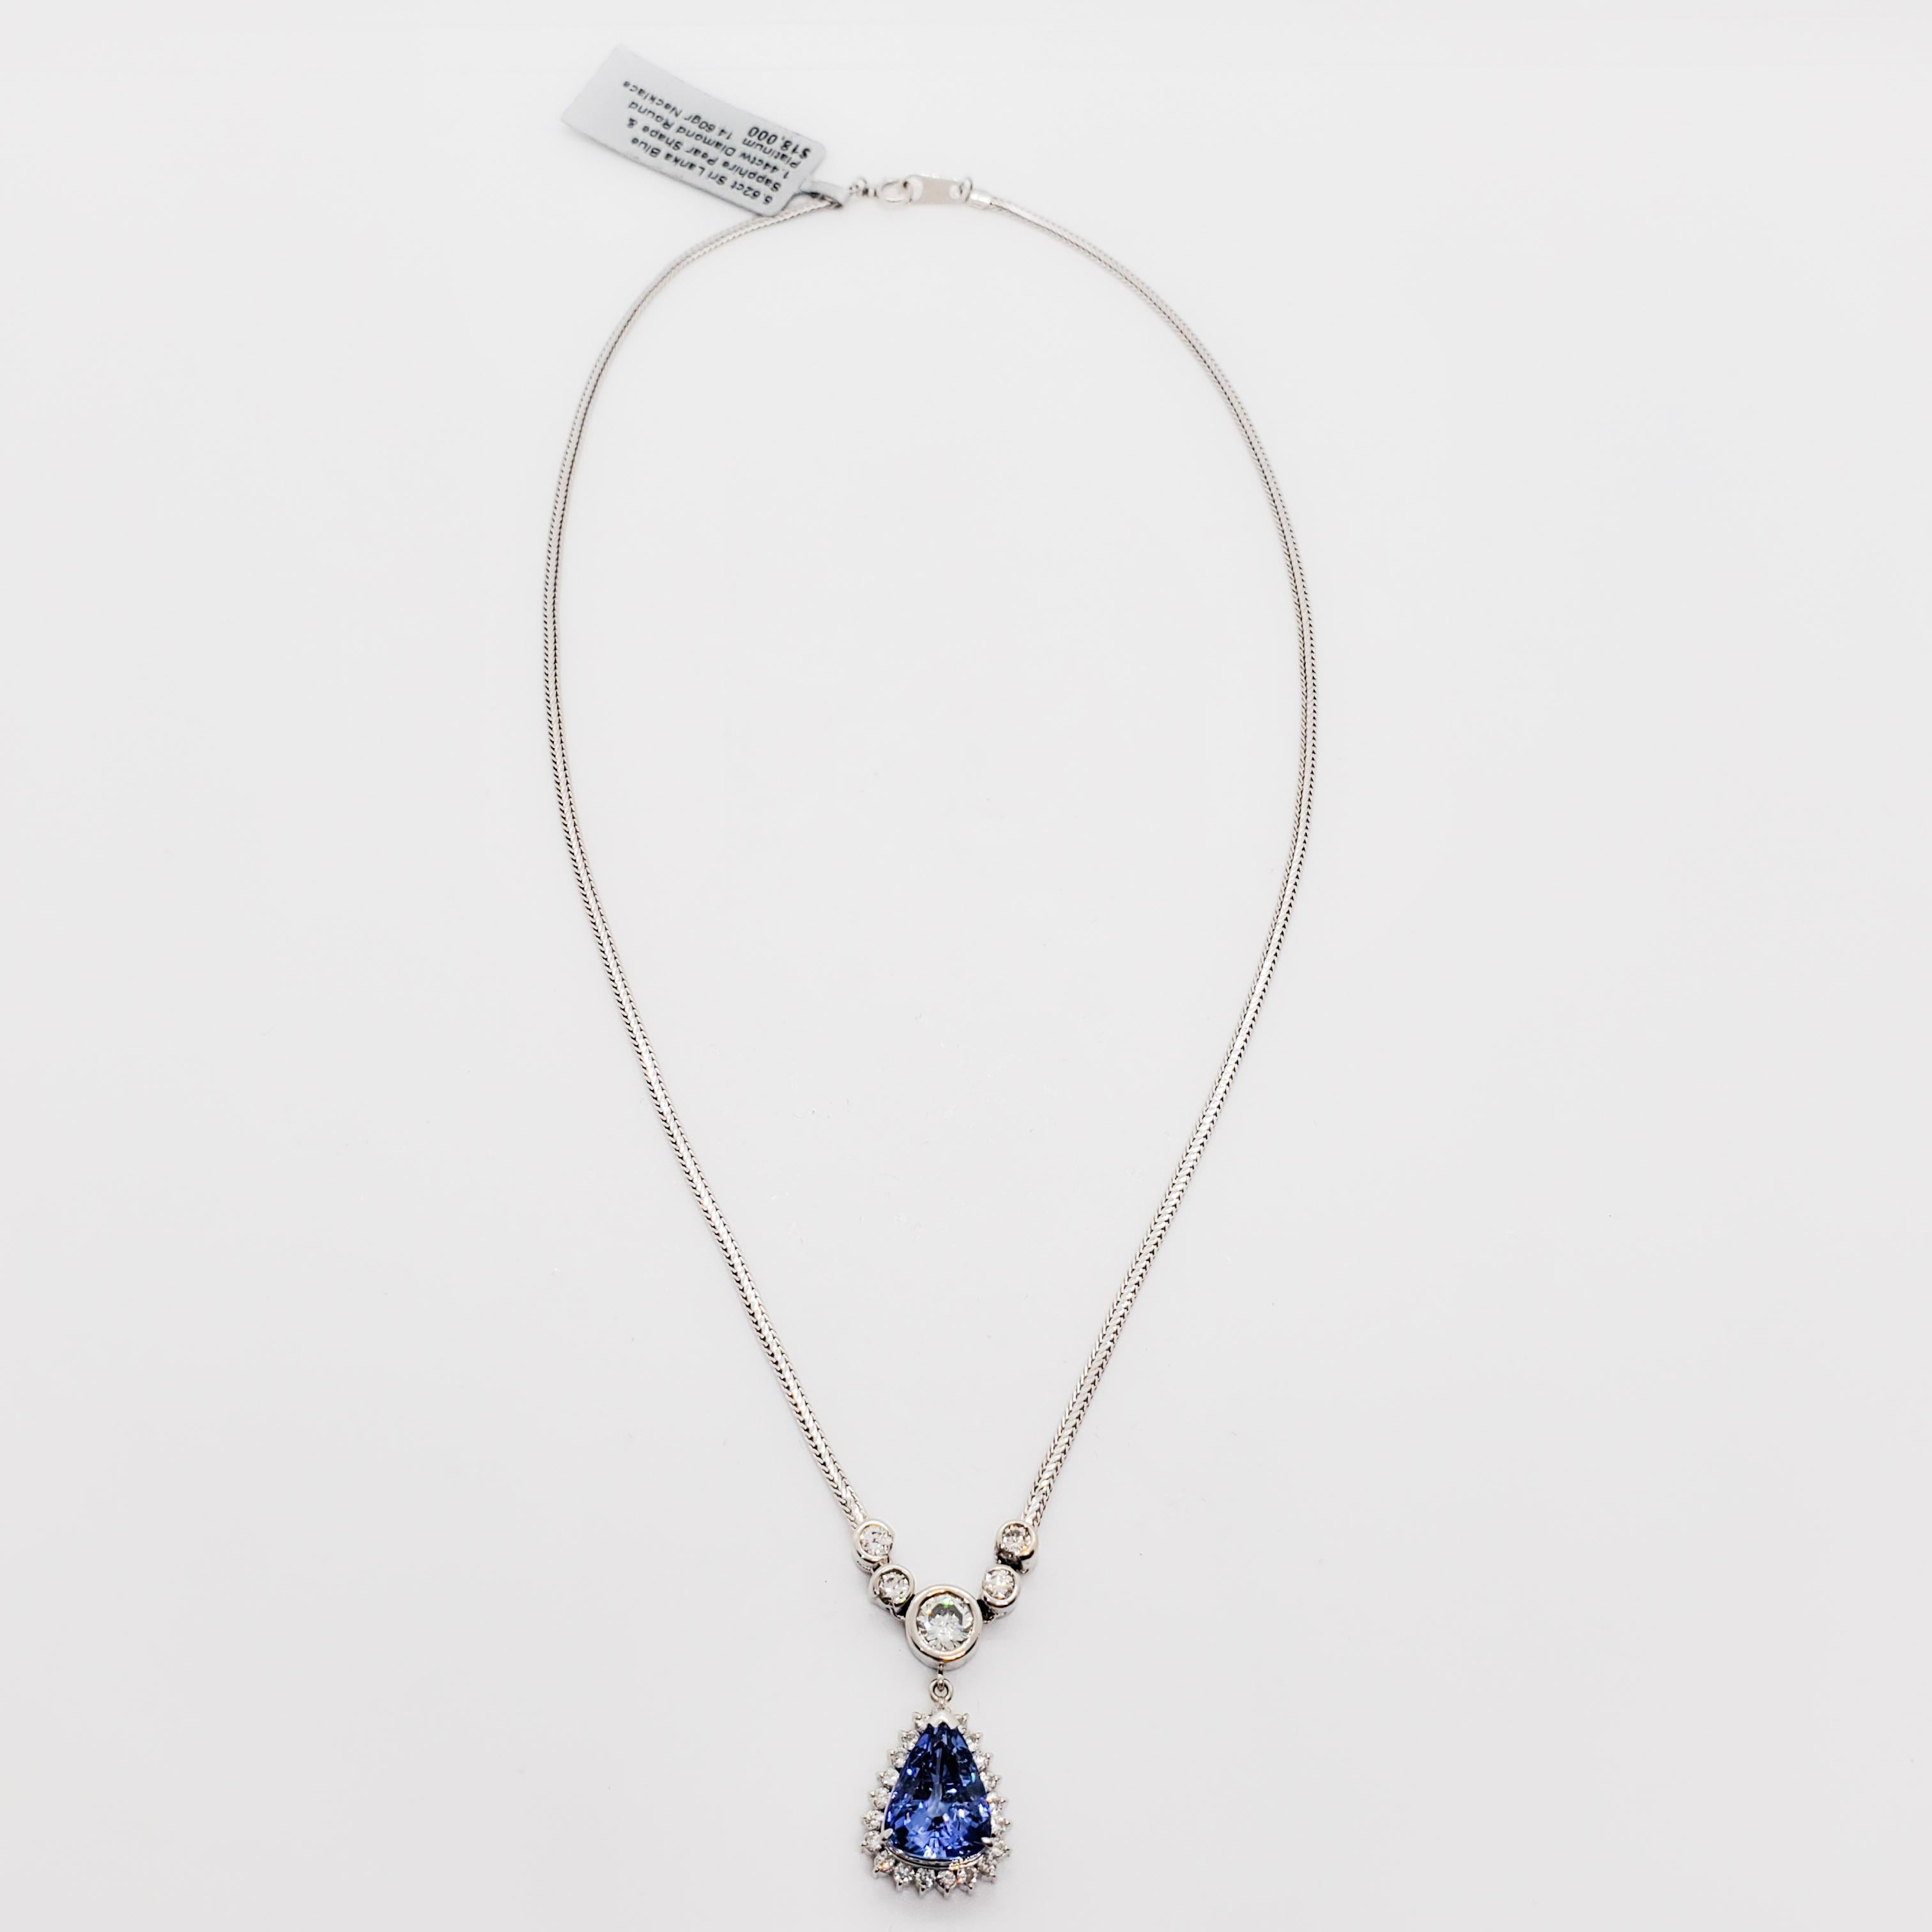 Beautiful Sri Lankan blue sapphire pear shape that weighs 5.62 cts.  Good quality, white, and bright diamond rounds that weigh 1.44 cts.  Handcrafted in platinum.  Attached to aa gorgeous thick platinum chain that gives it a substantial look. 